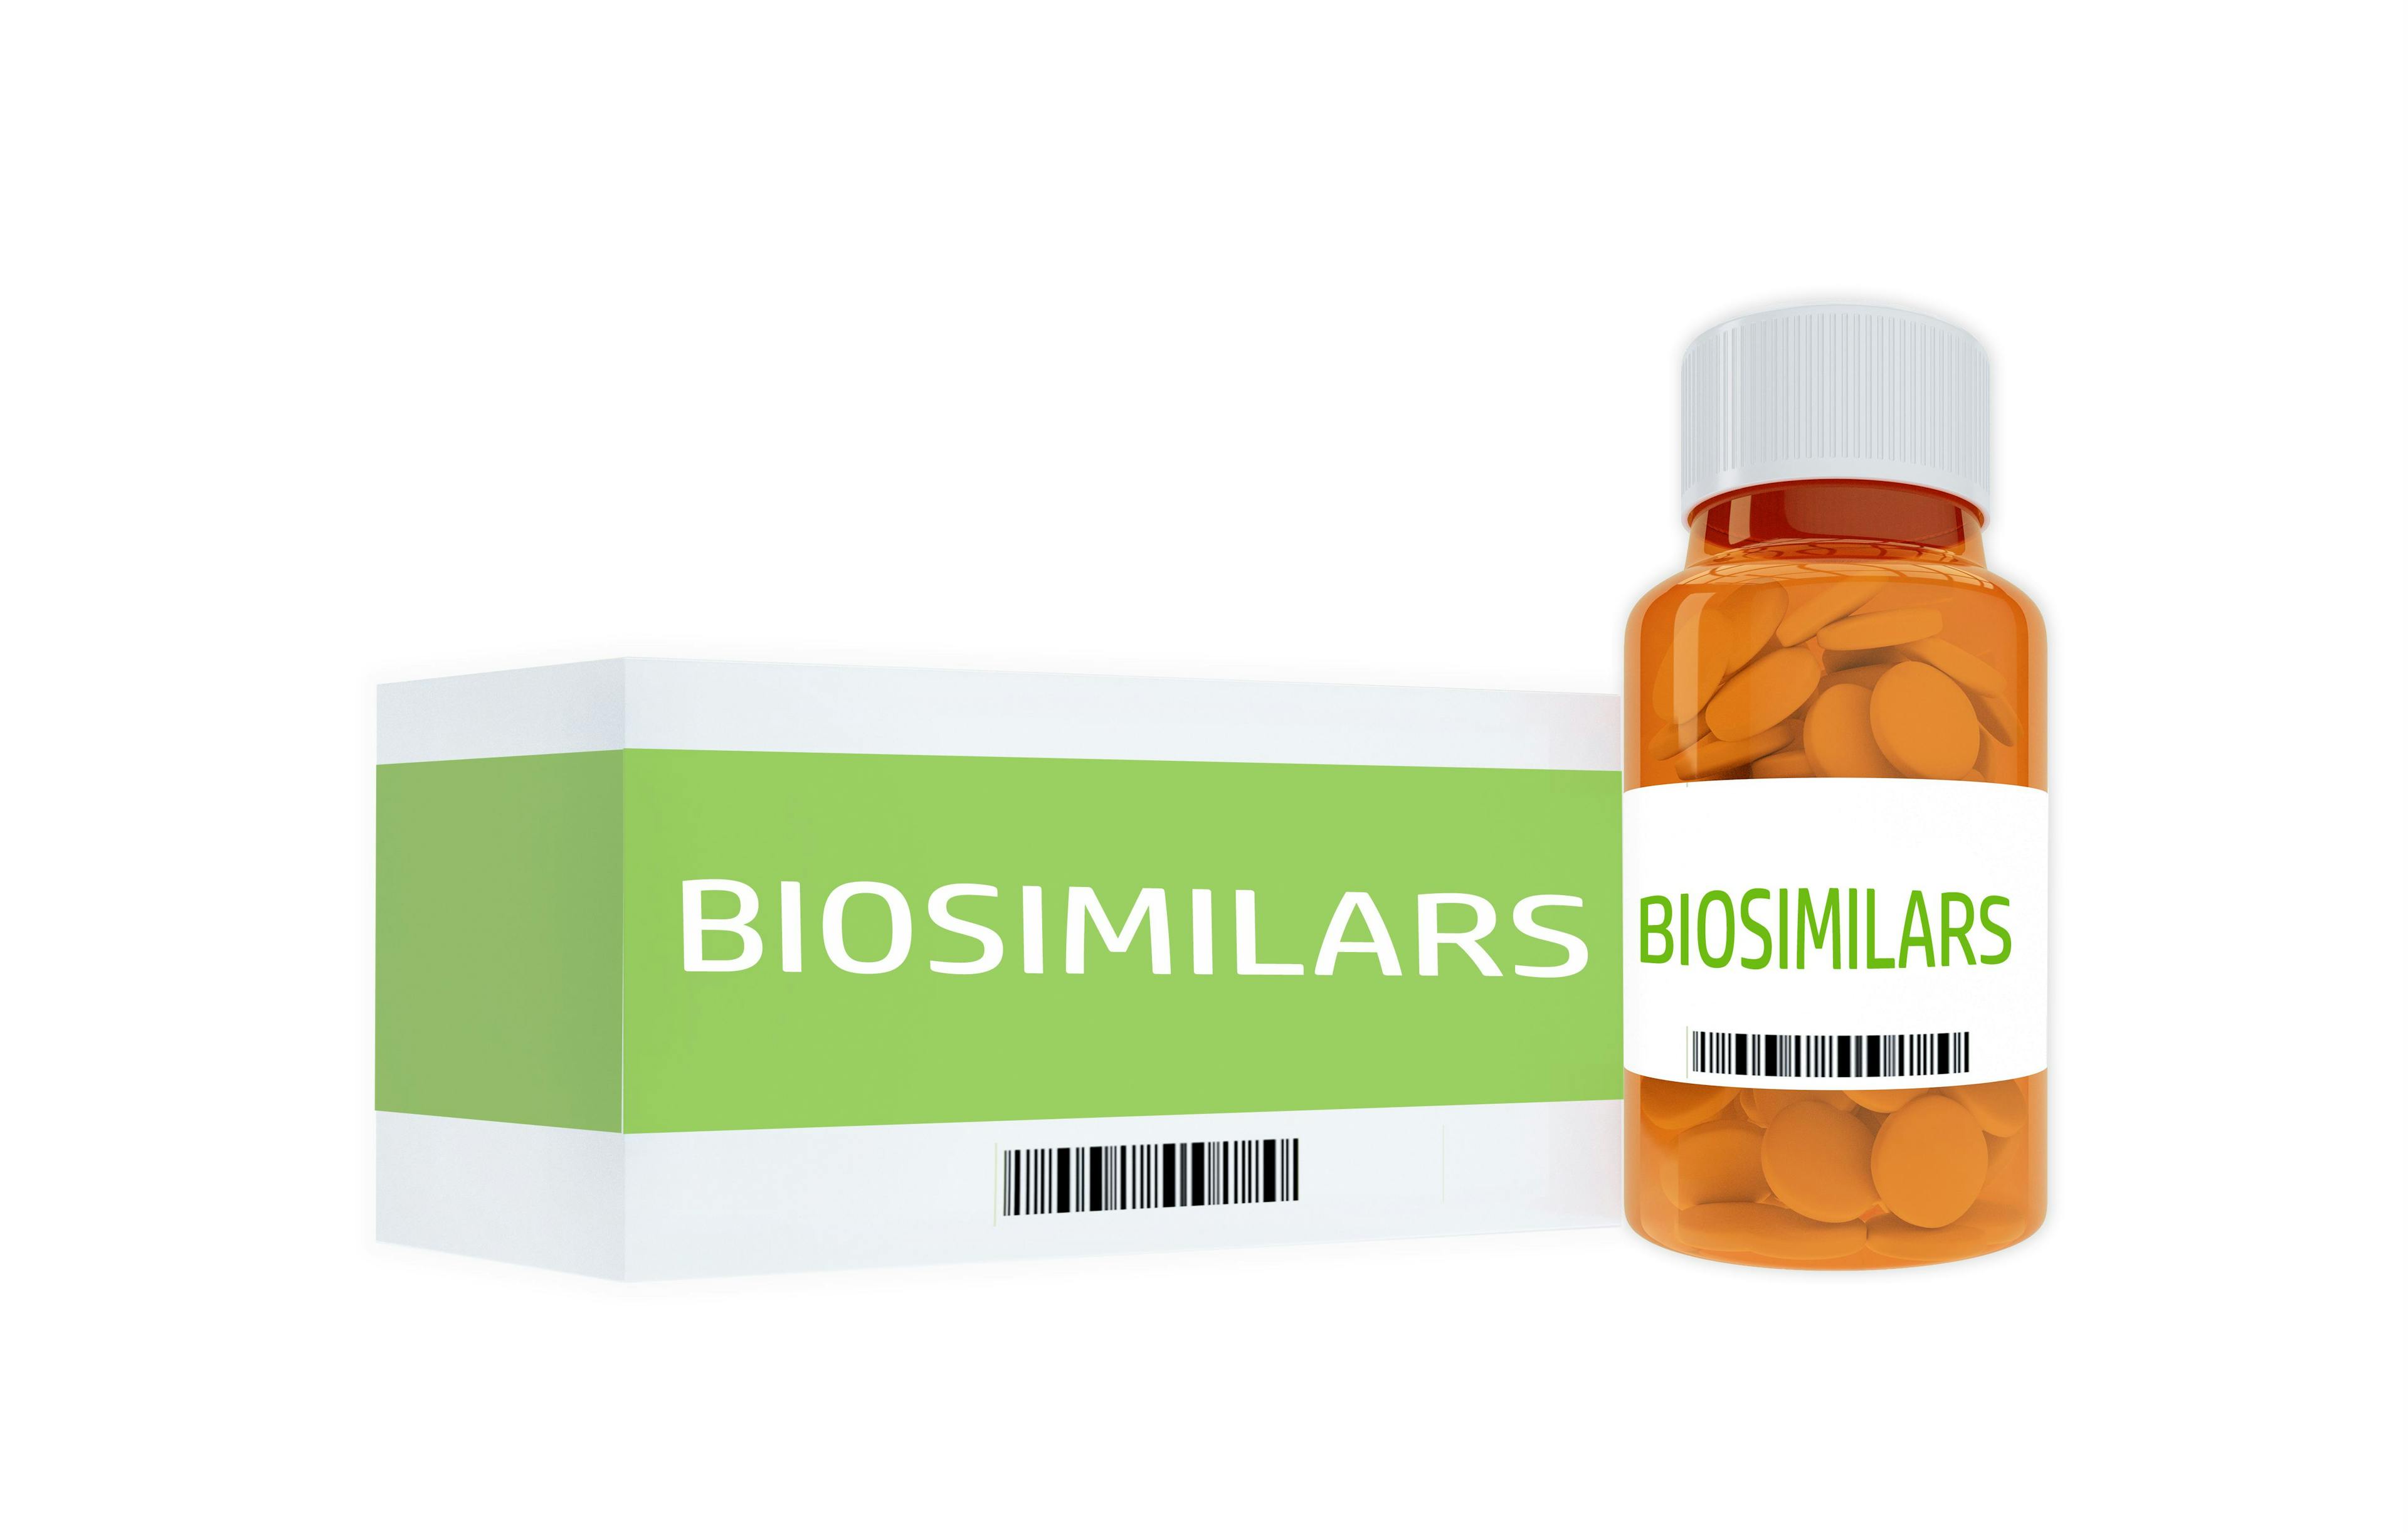 8 Humira Biosimilars now Available, but Formulary Questions Remain